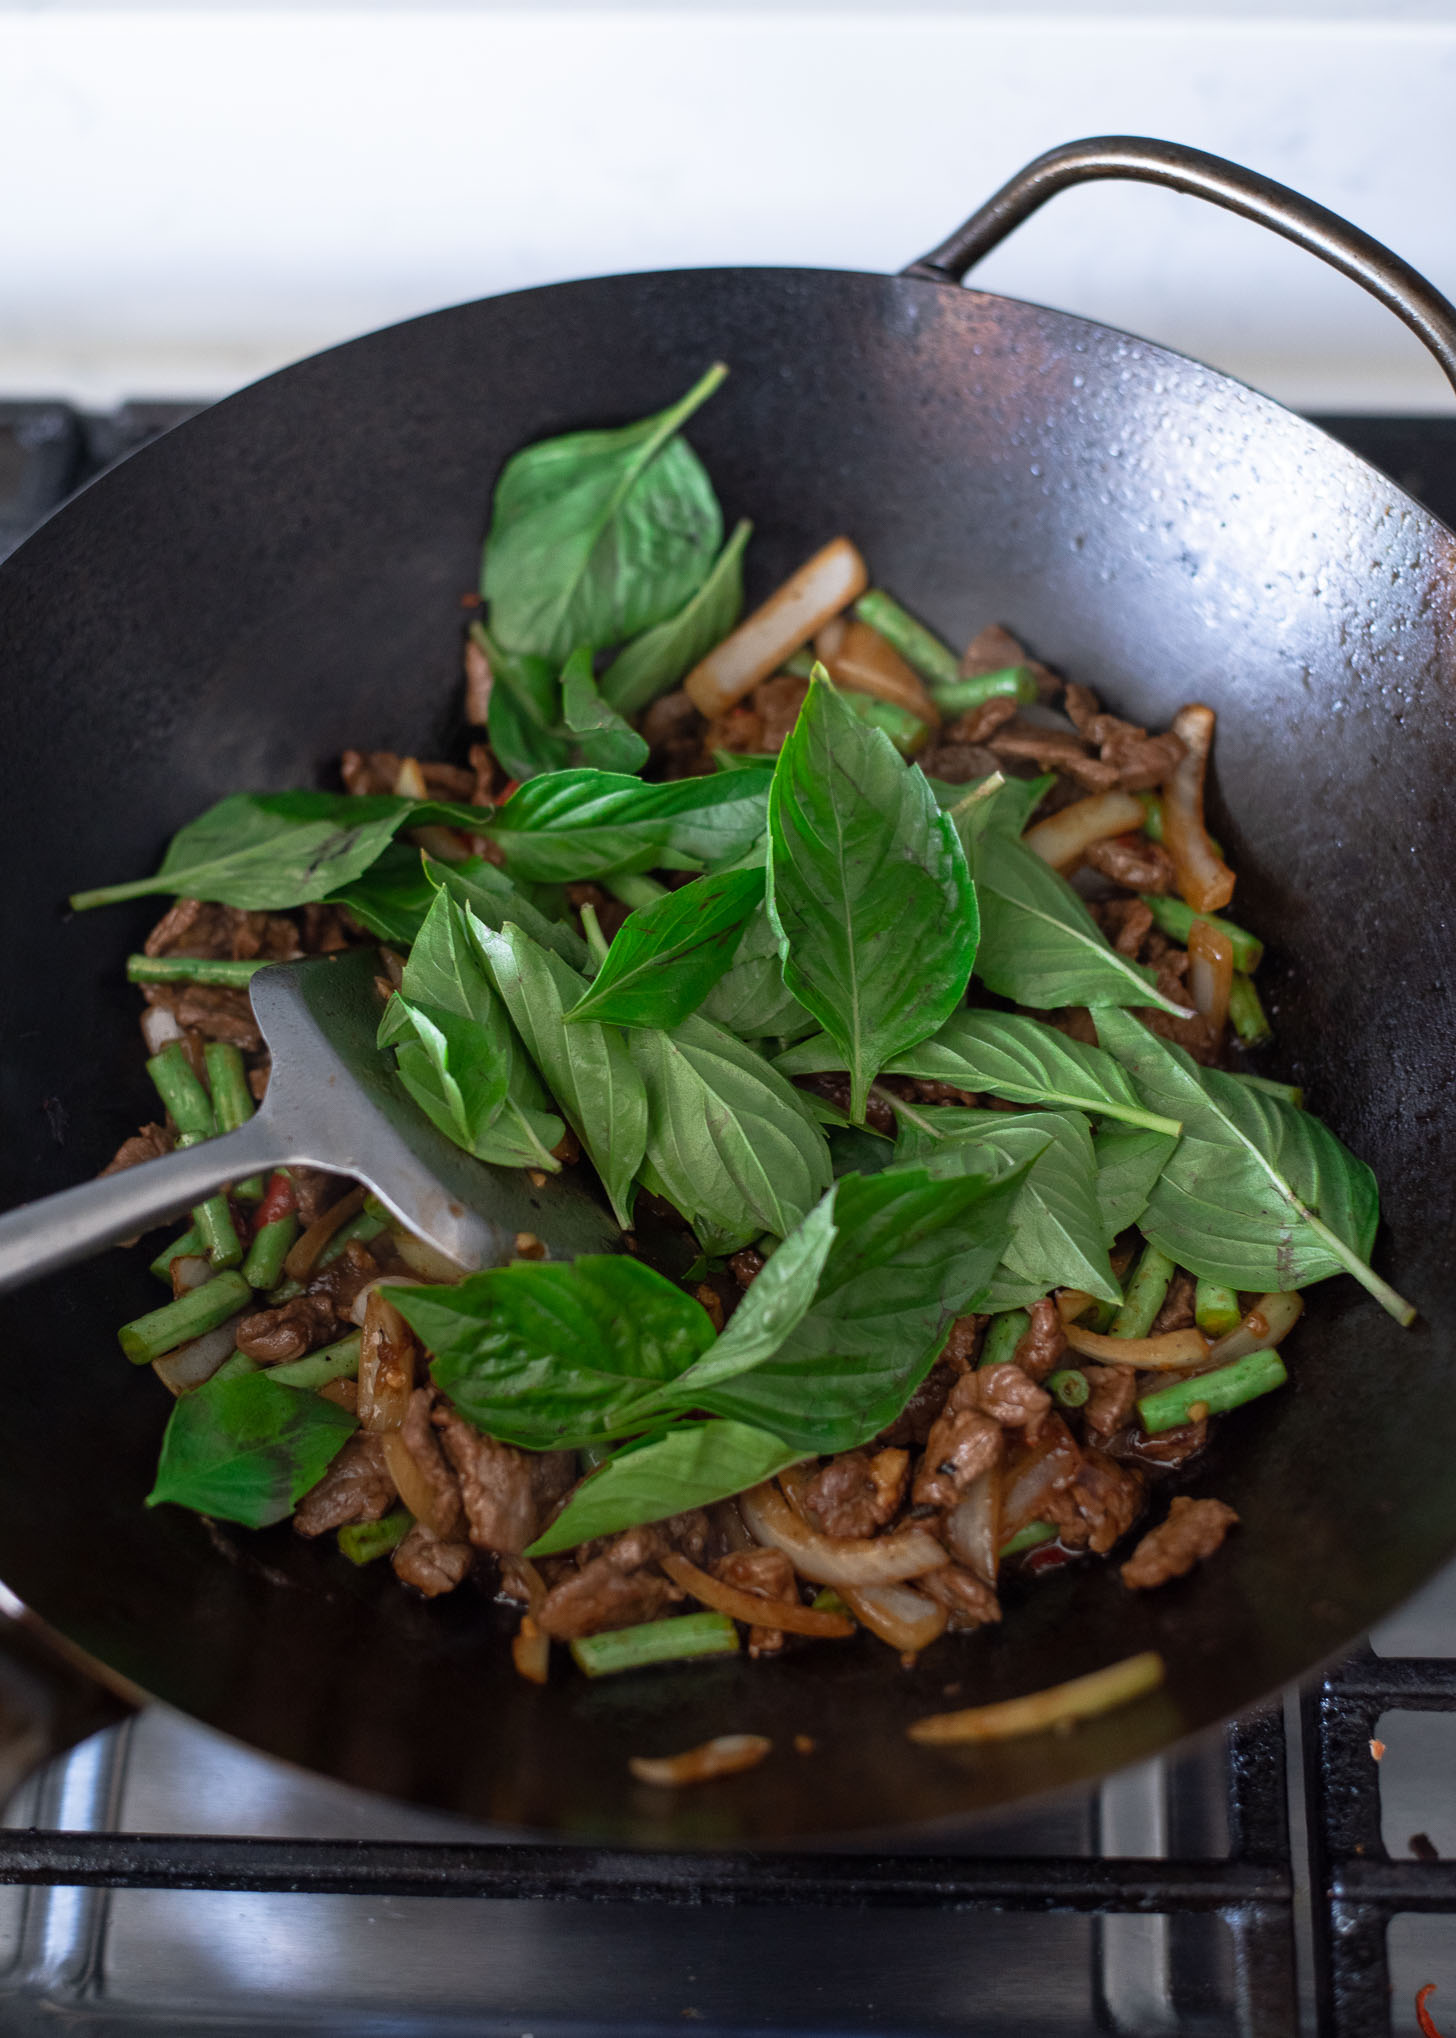 Thai basil leaves are added to the beef stir fry in a wok.